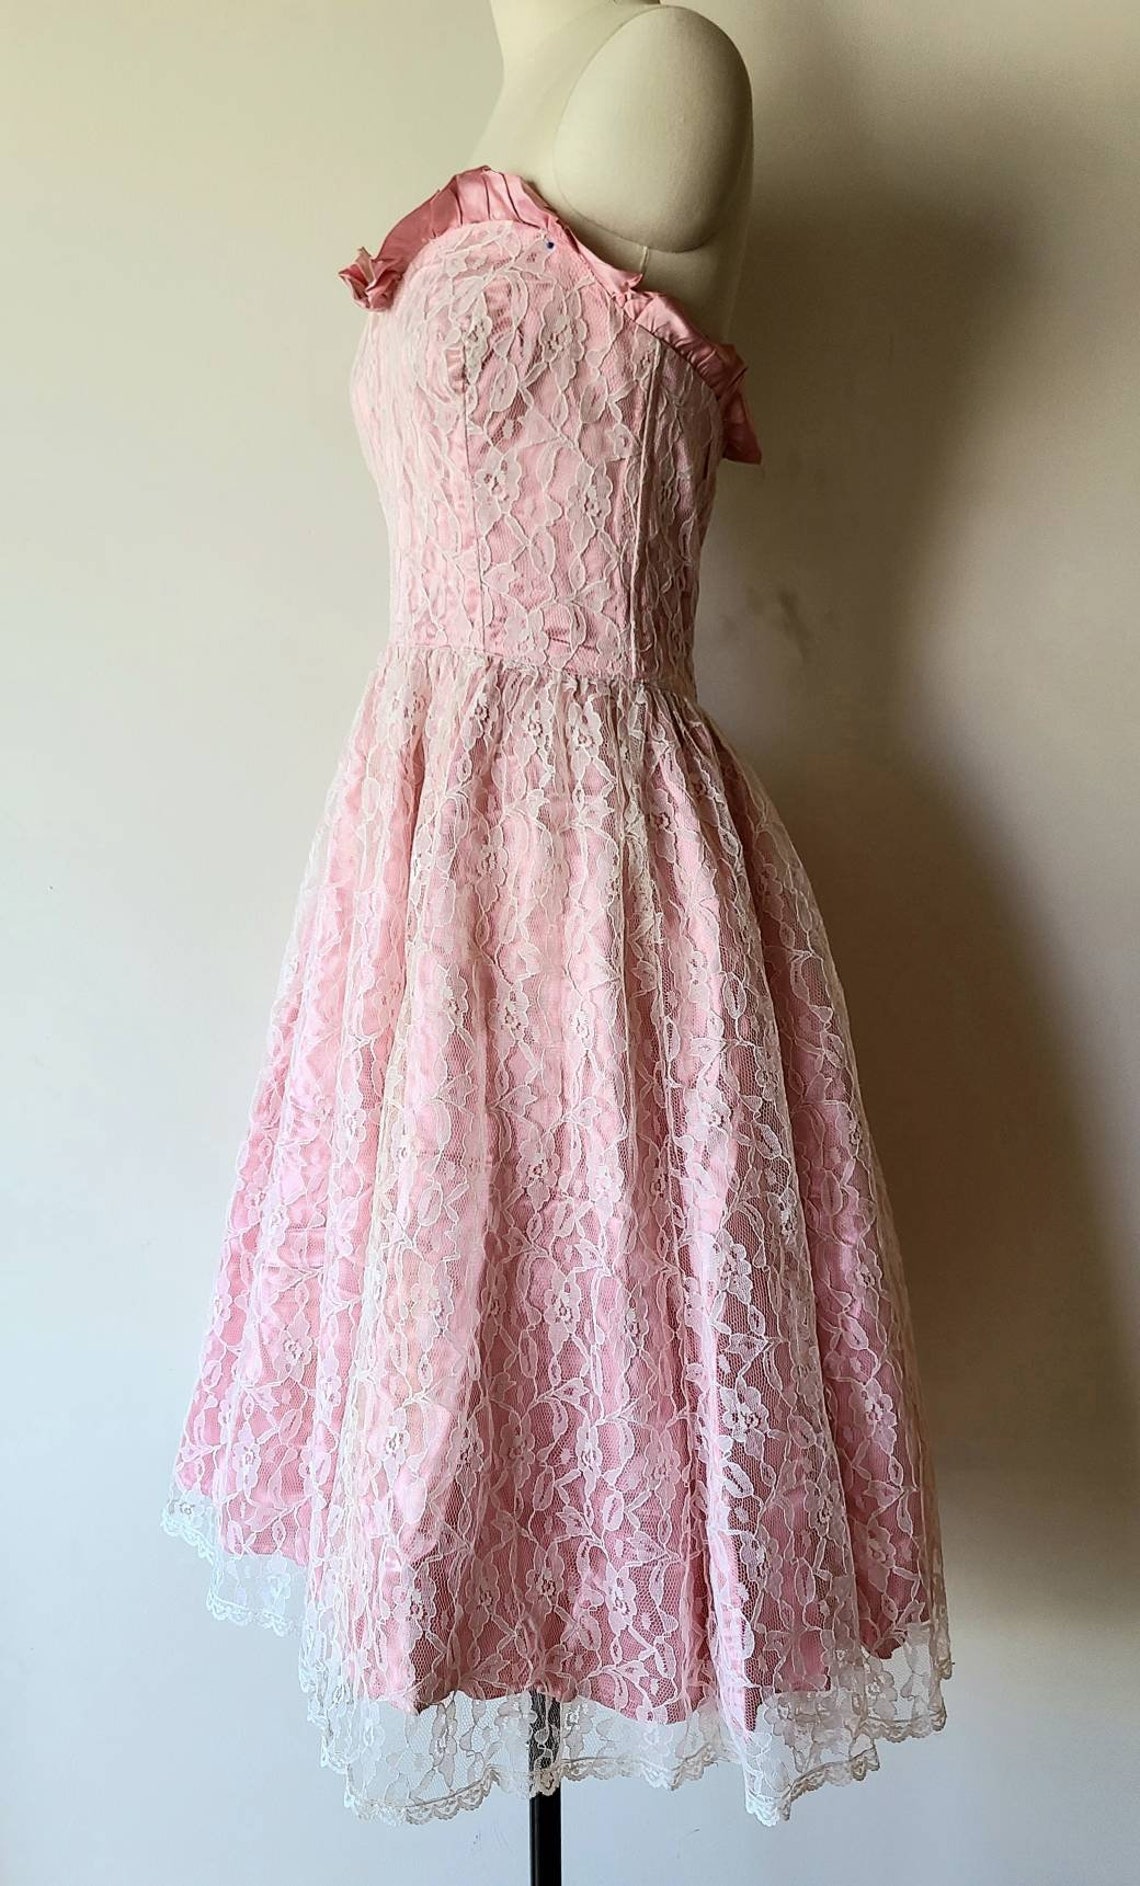 60s lace dress/ sweetheart neckline strapless pink satin and | Etsy